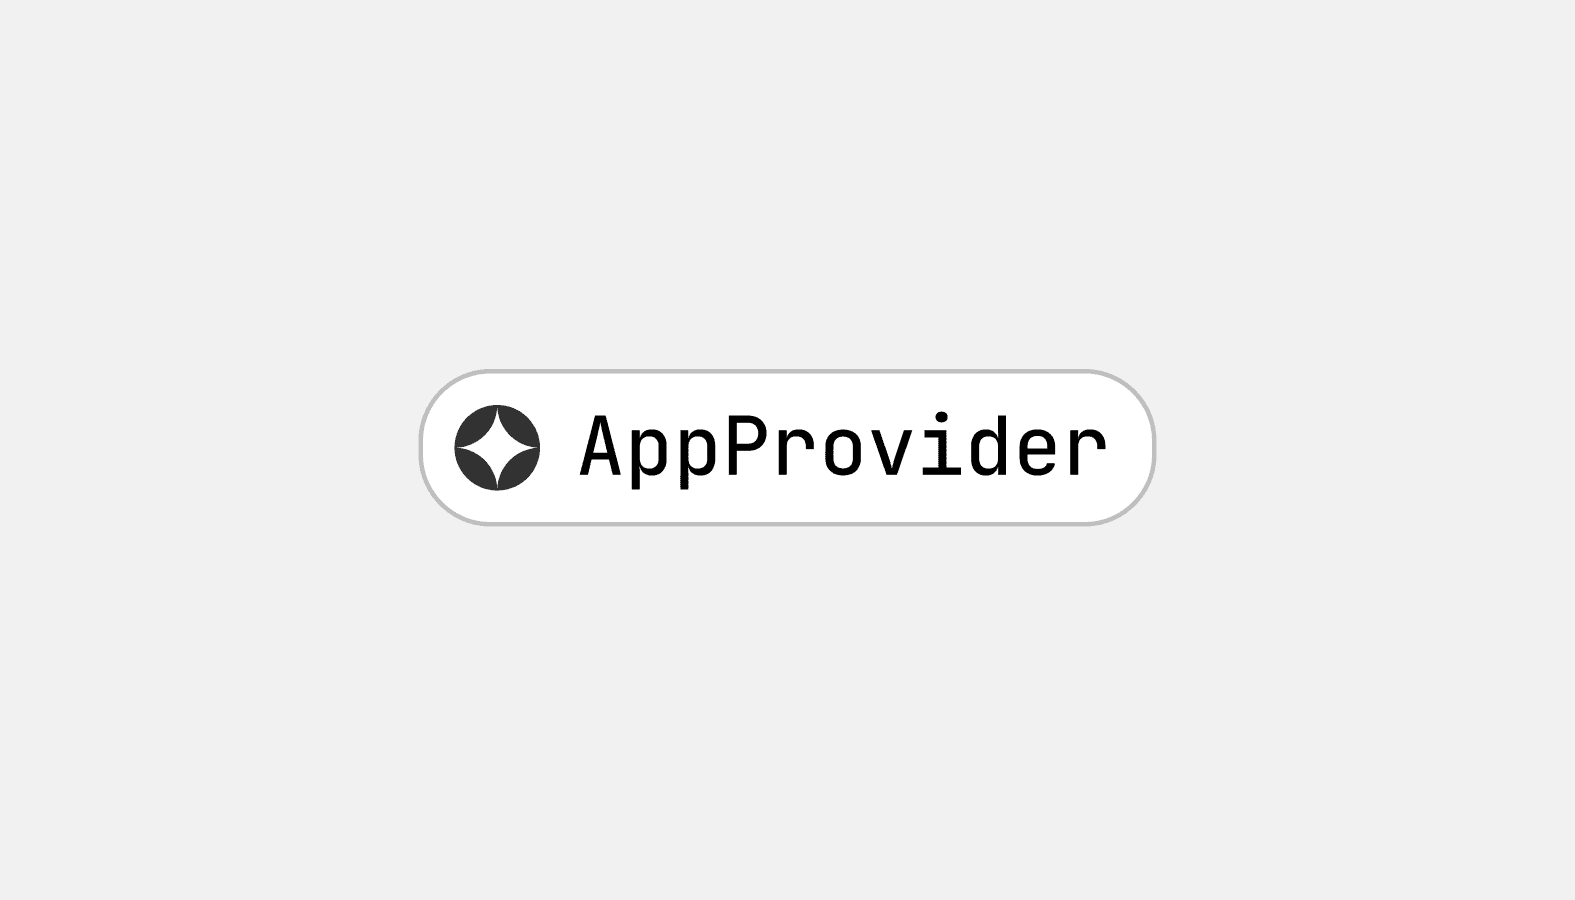 Screenshot of the app-provider component